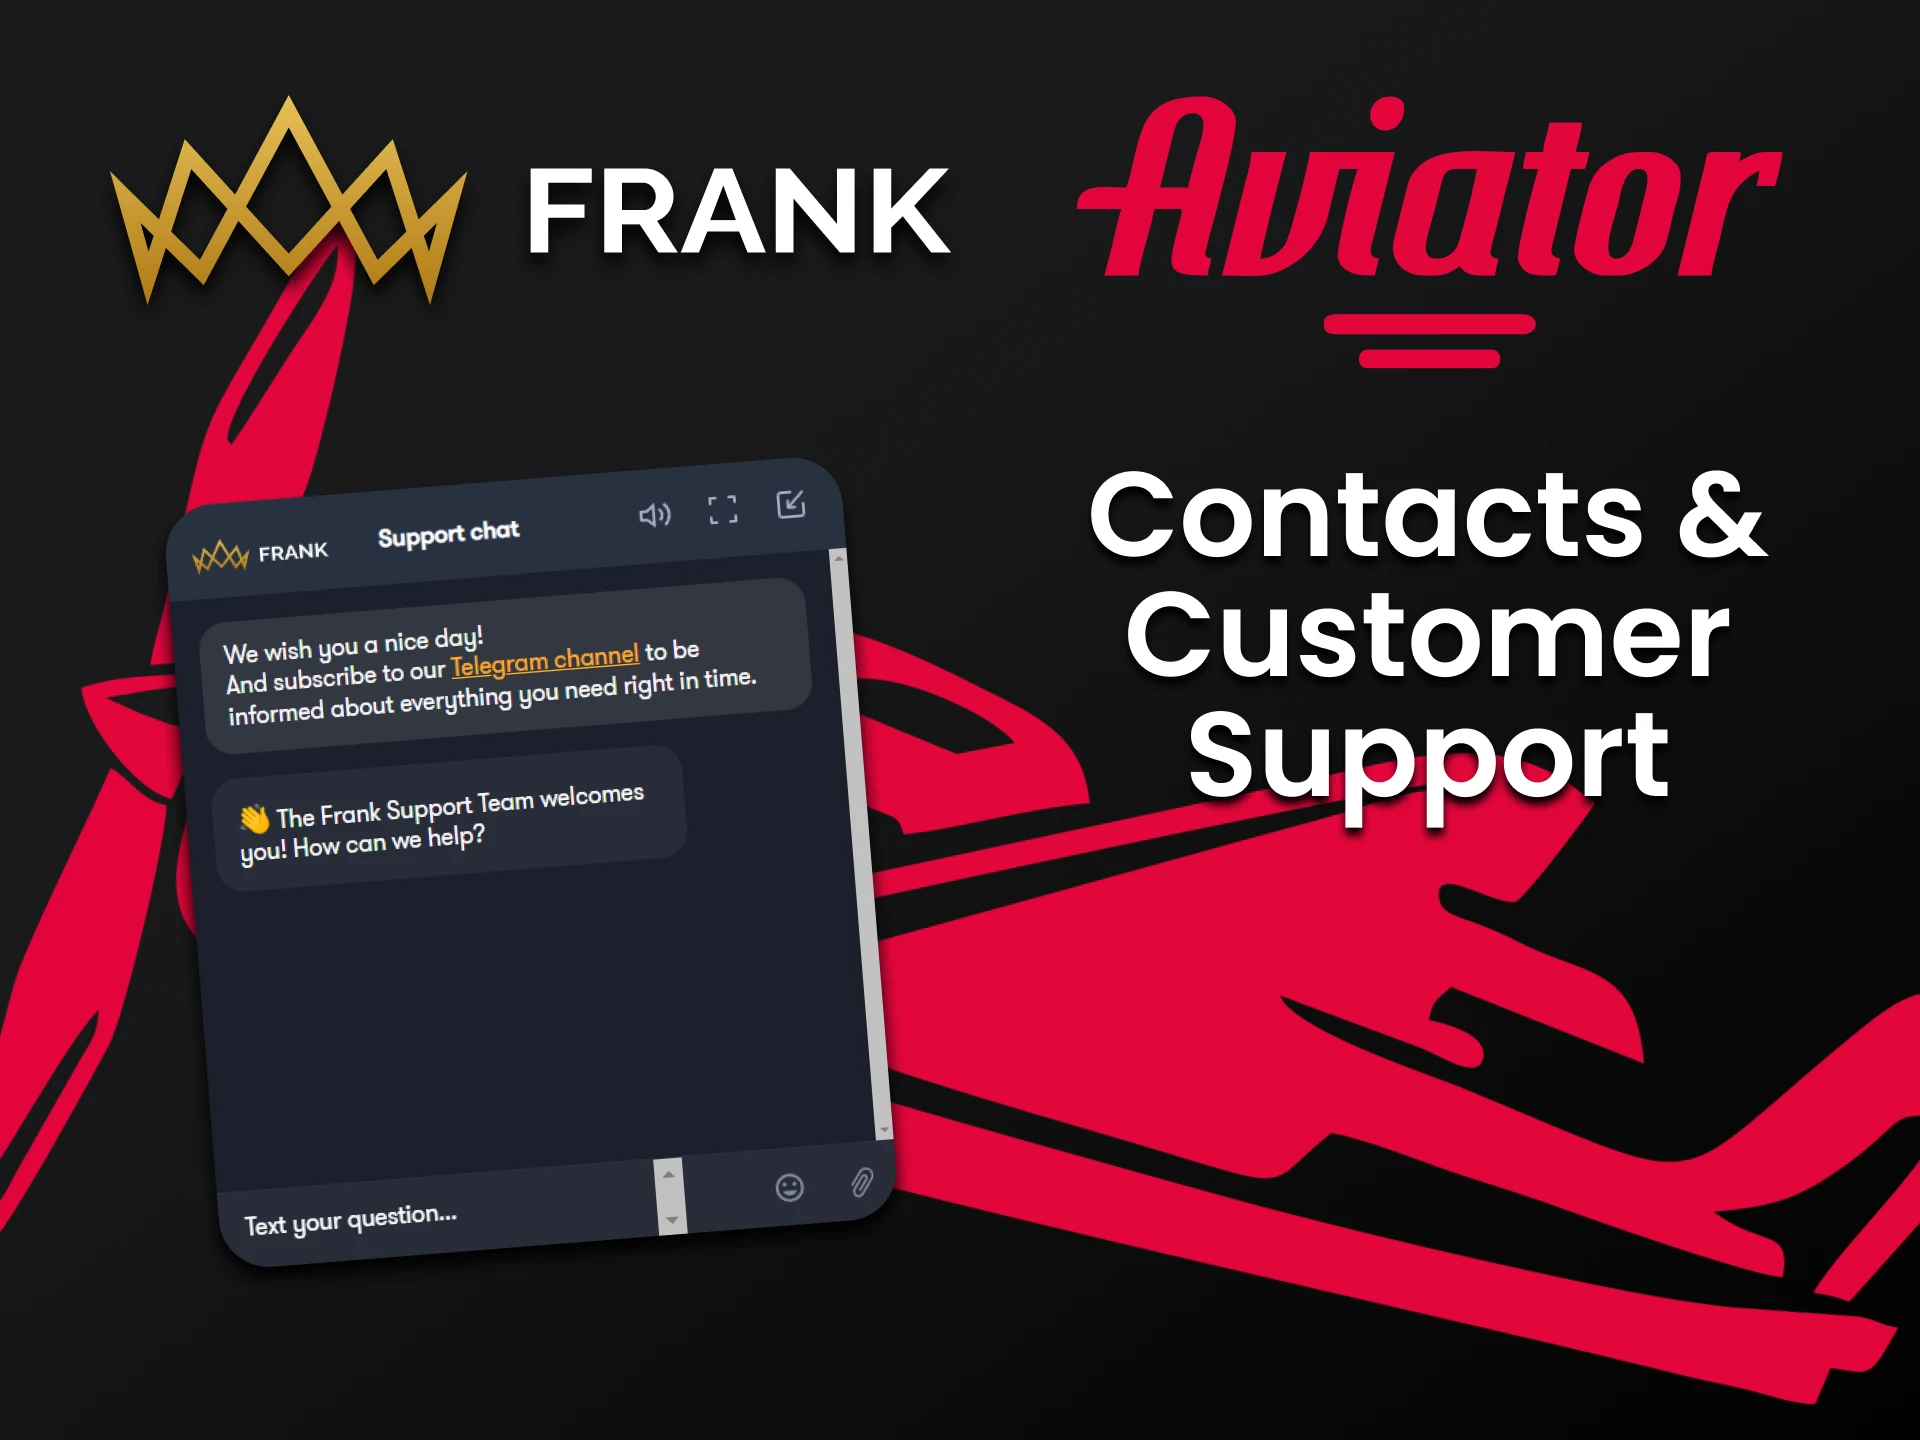 We will tell you about ways to contact the Frank Casino team for Aviator.